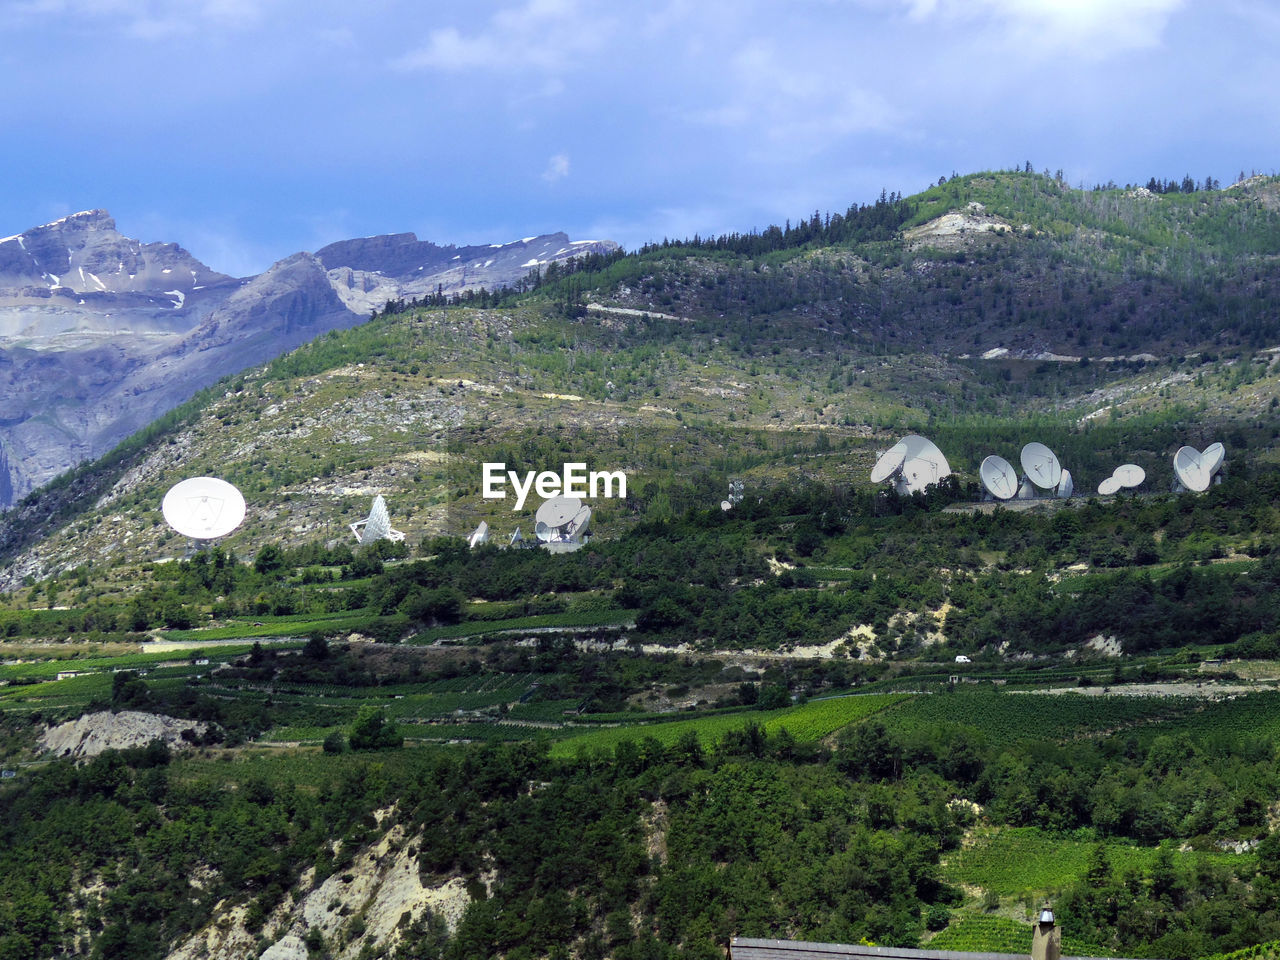 Satterlite dishes oon mountainscape in europe communication technologies